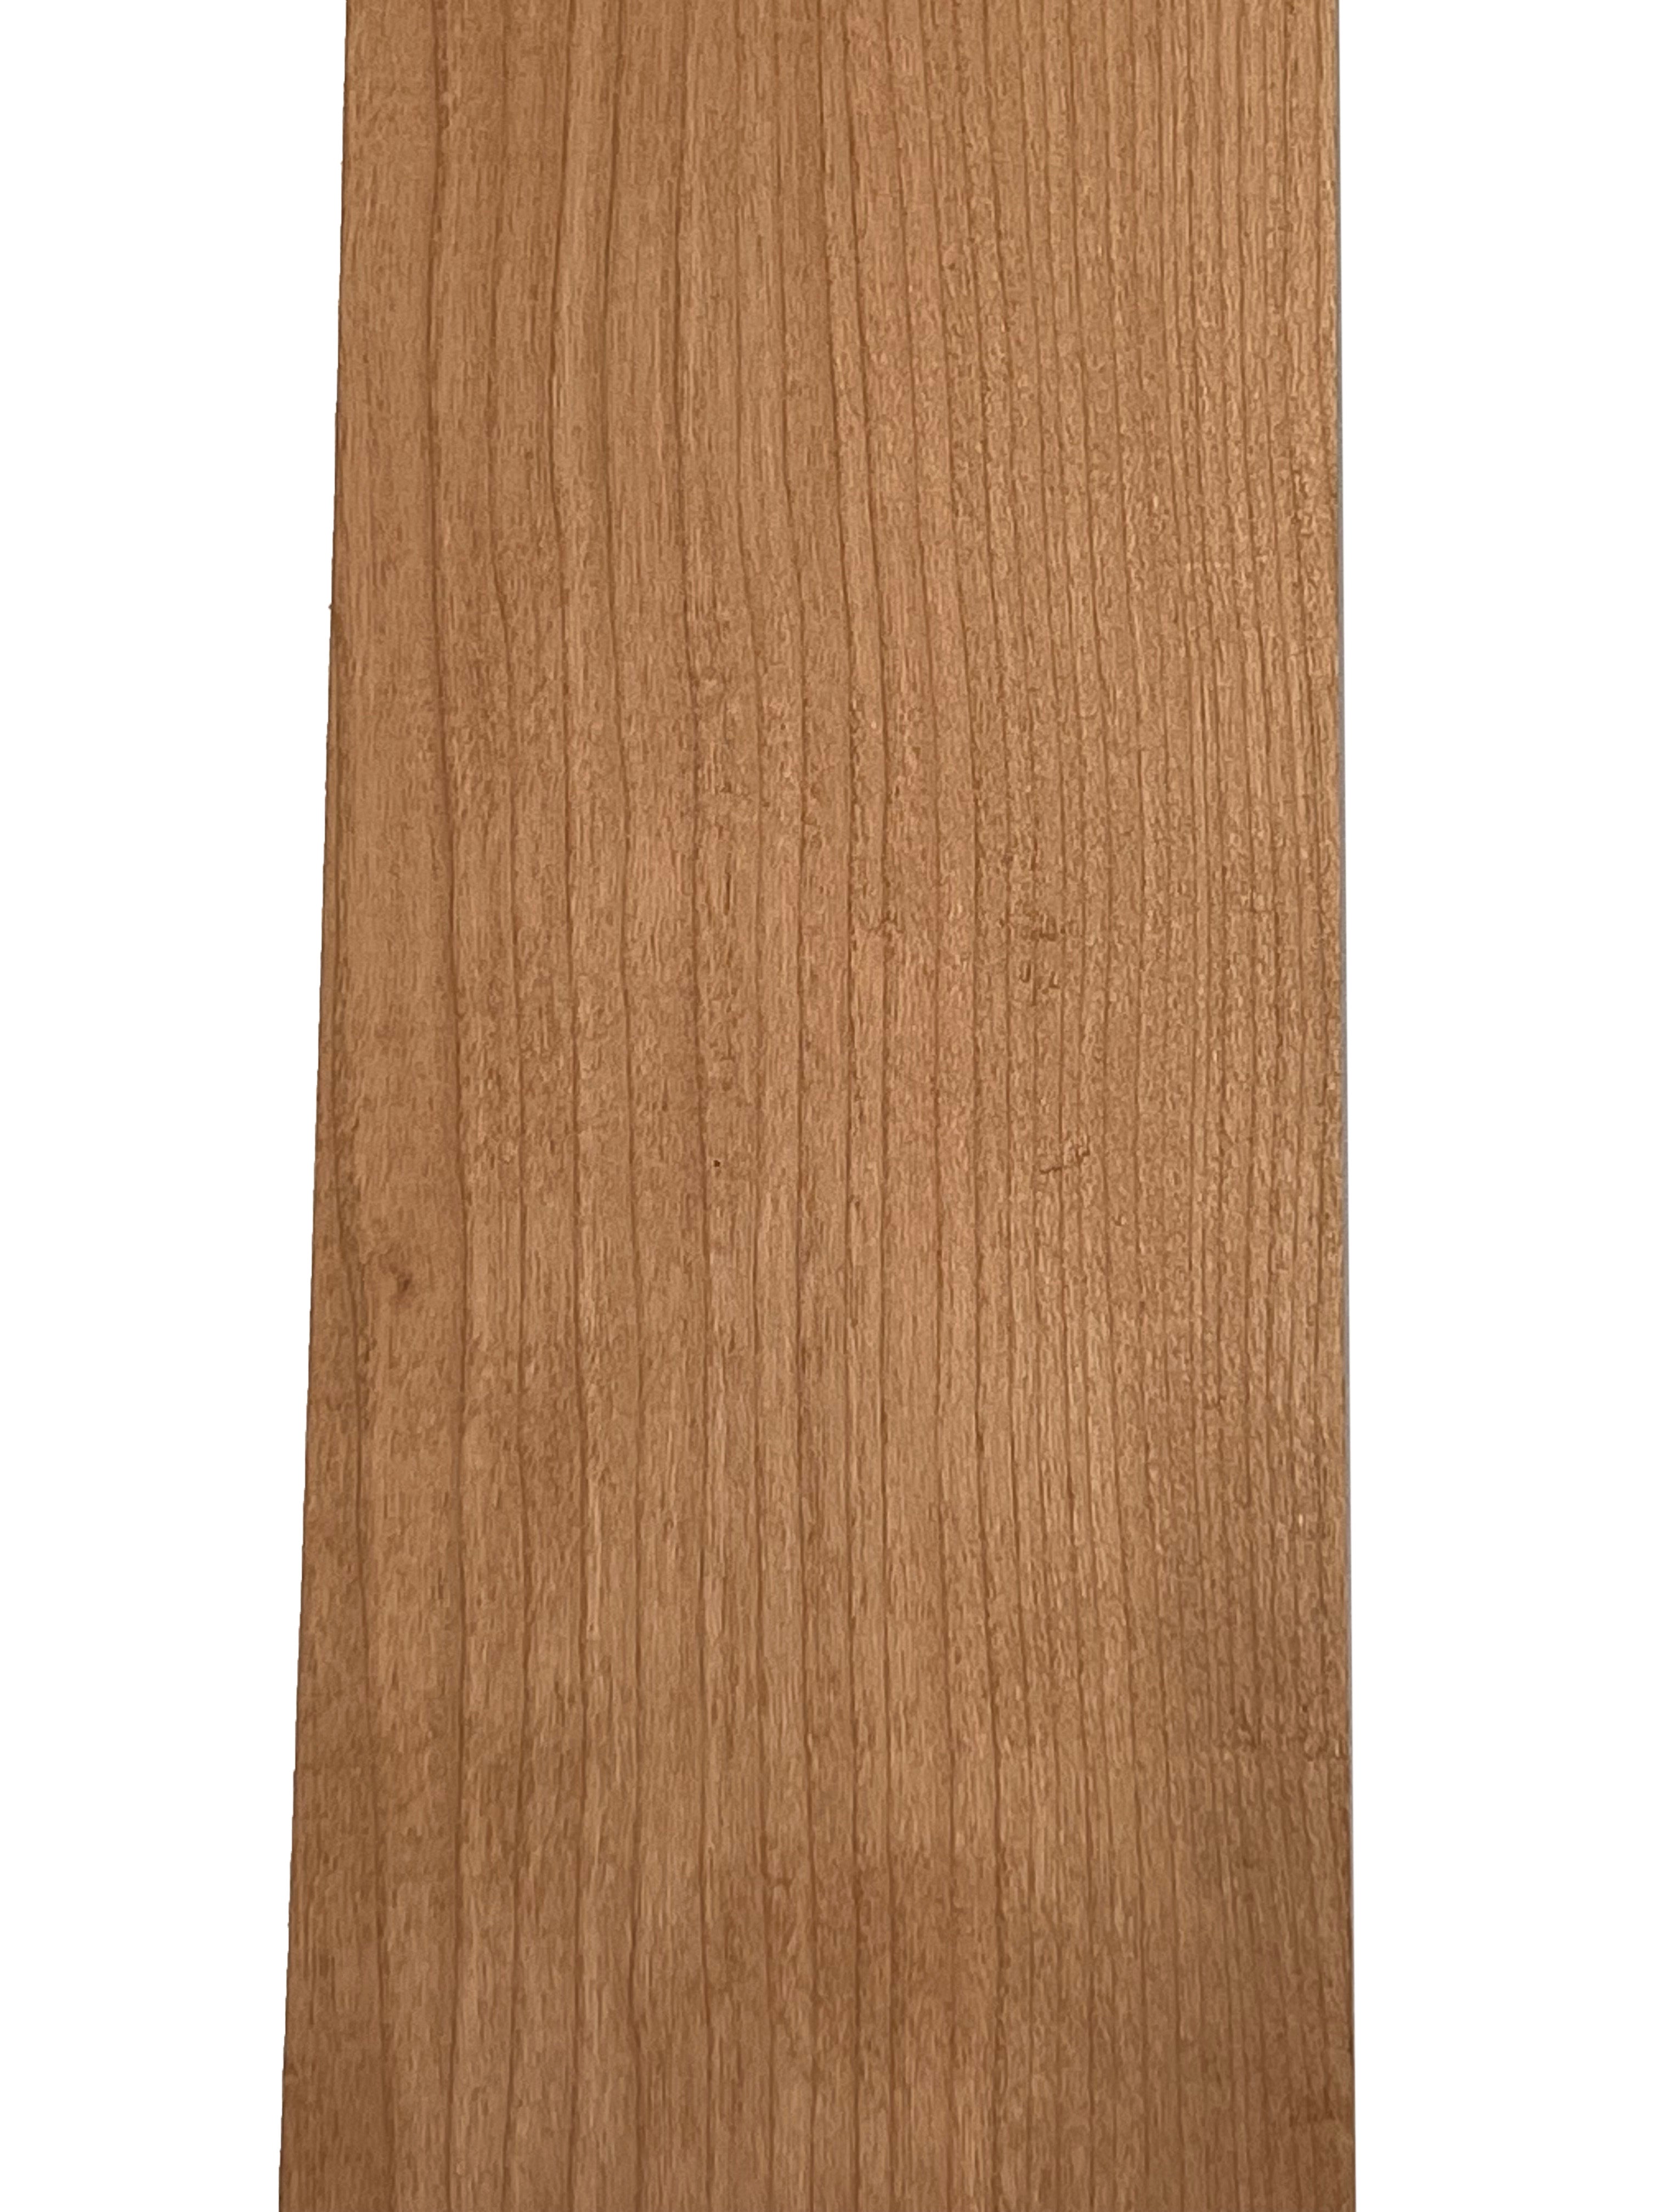 Combo Pack 10, Cherry Guitar Neck Blanks 24” x 3” x 1” - Exotic Wood Zone - Buy online Across USA 